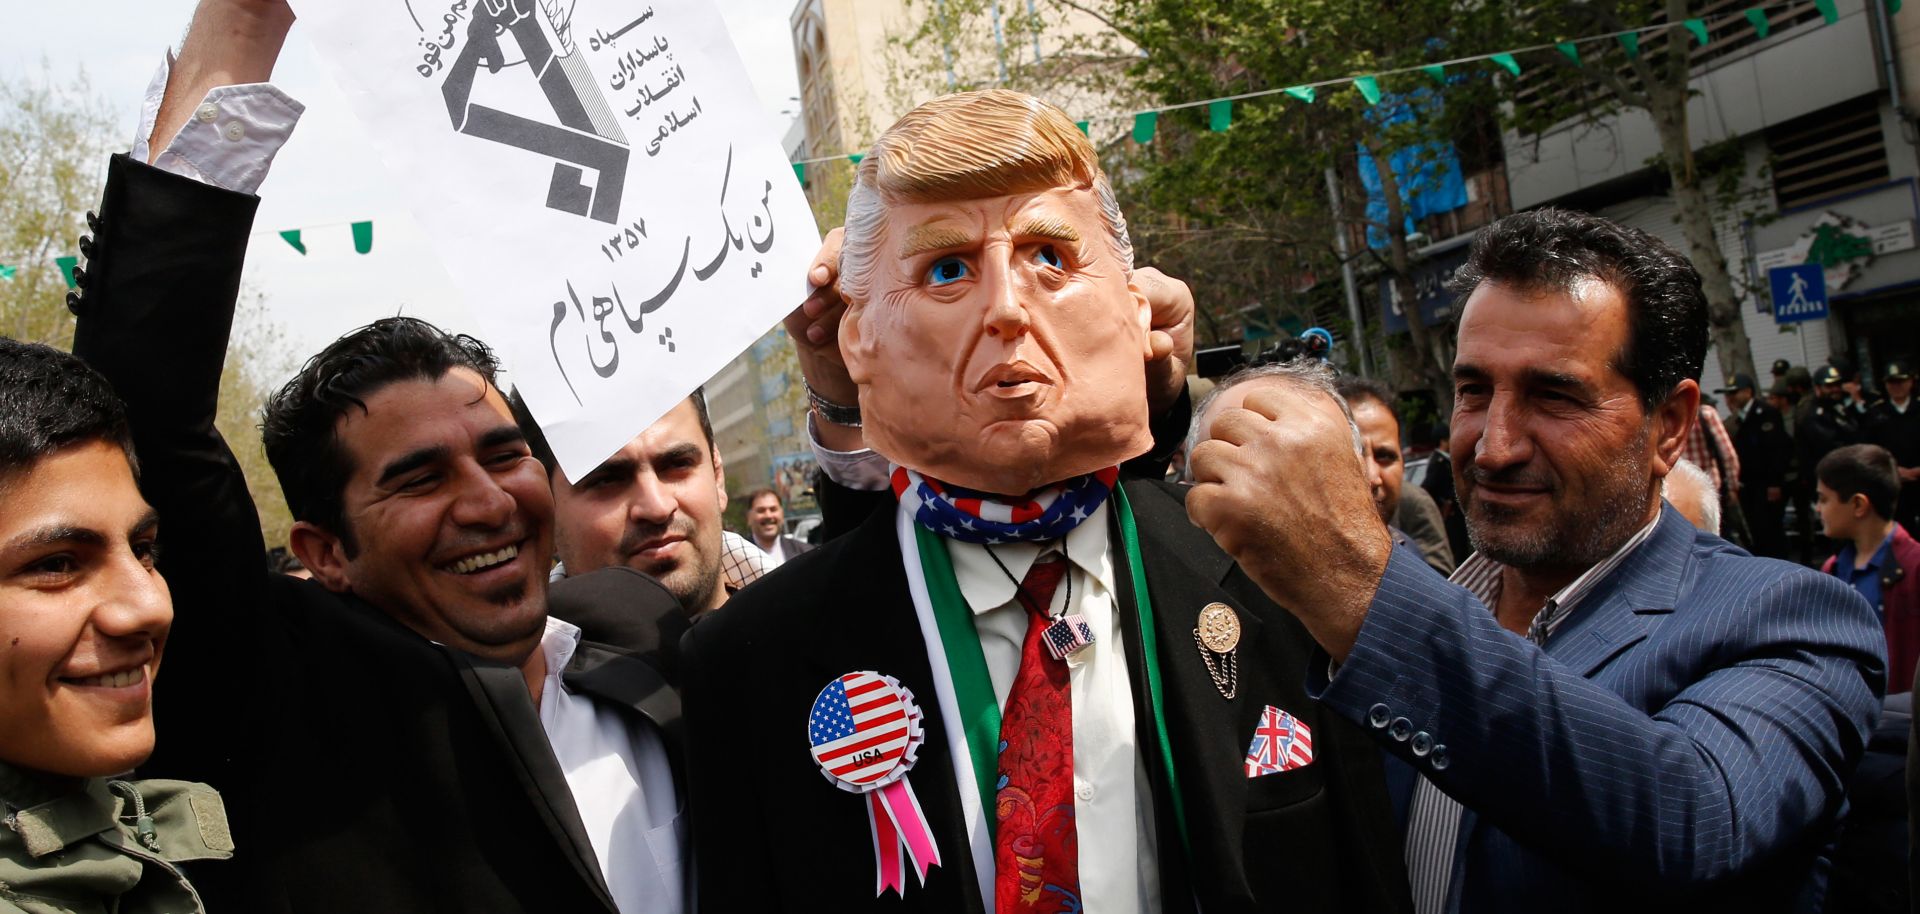 Protesters pretend to hit a man wearing a mask of U.S. President Donald Trump during an April 12, 2019, rally in the Iranian capital of Tehran.